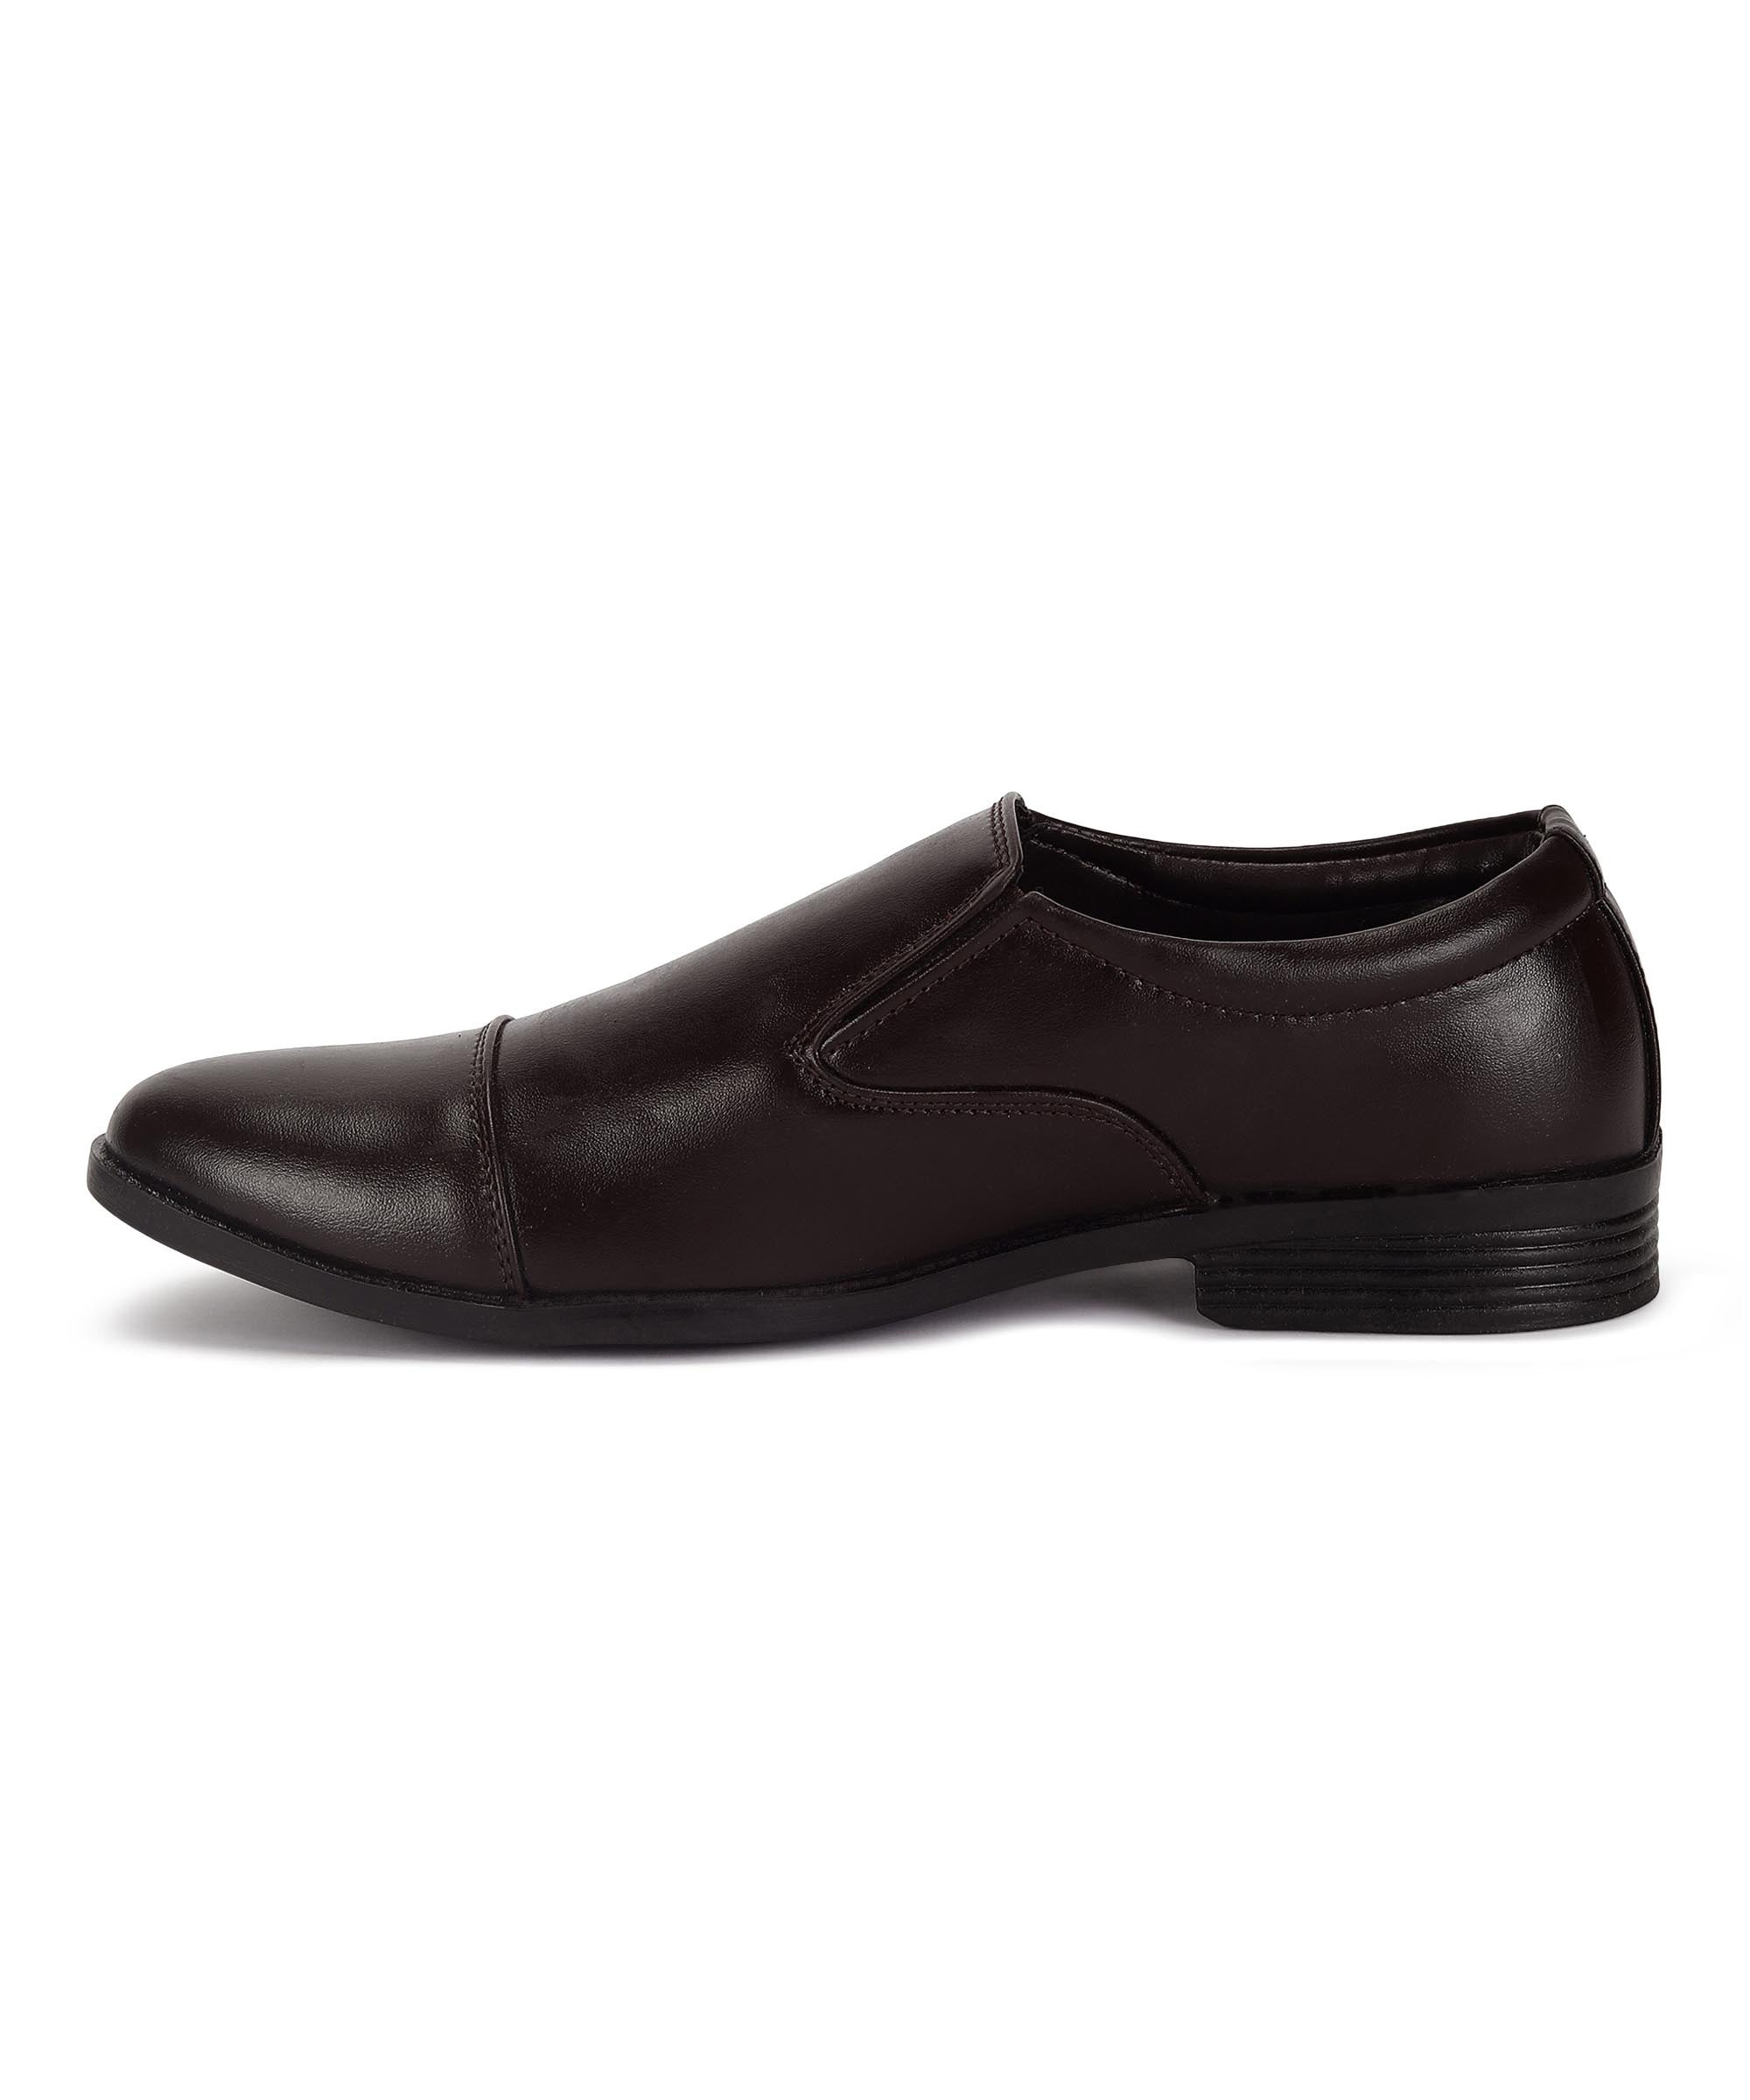 Paragon K11241G Men Formal Shoes | Smart &amp; Sleek Design | Comfortable Sole with Cushioning | Daily &amp; Occasion Wear